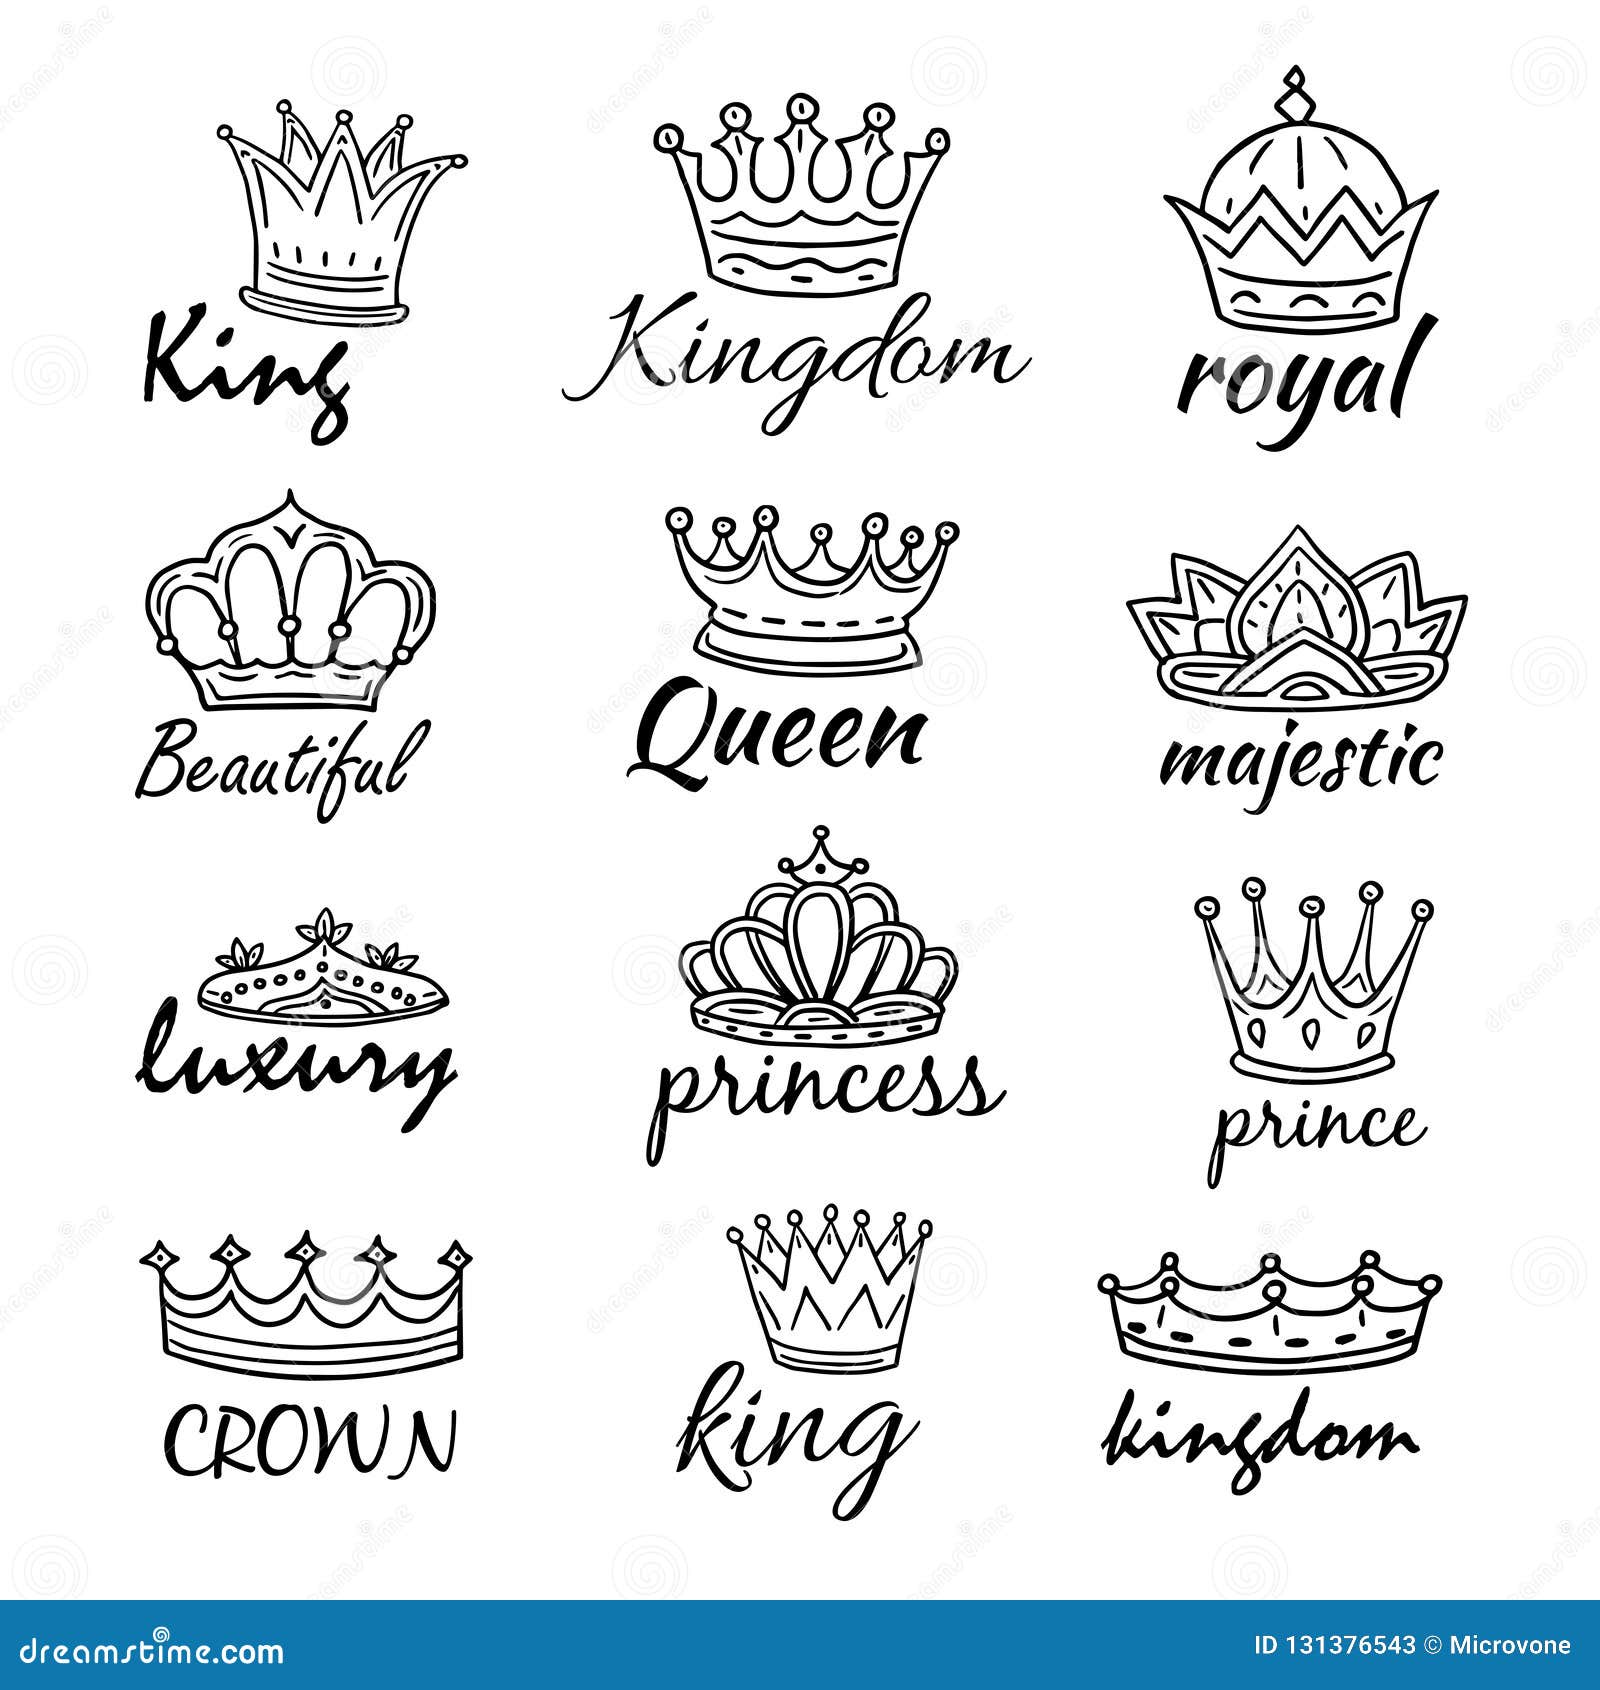 Prince Crown Vector Images over 31000